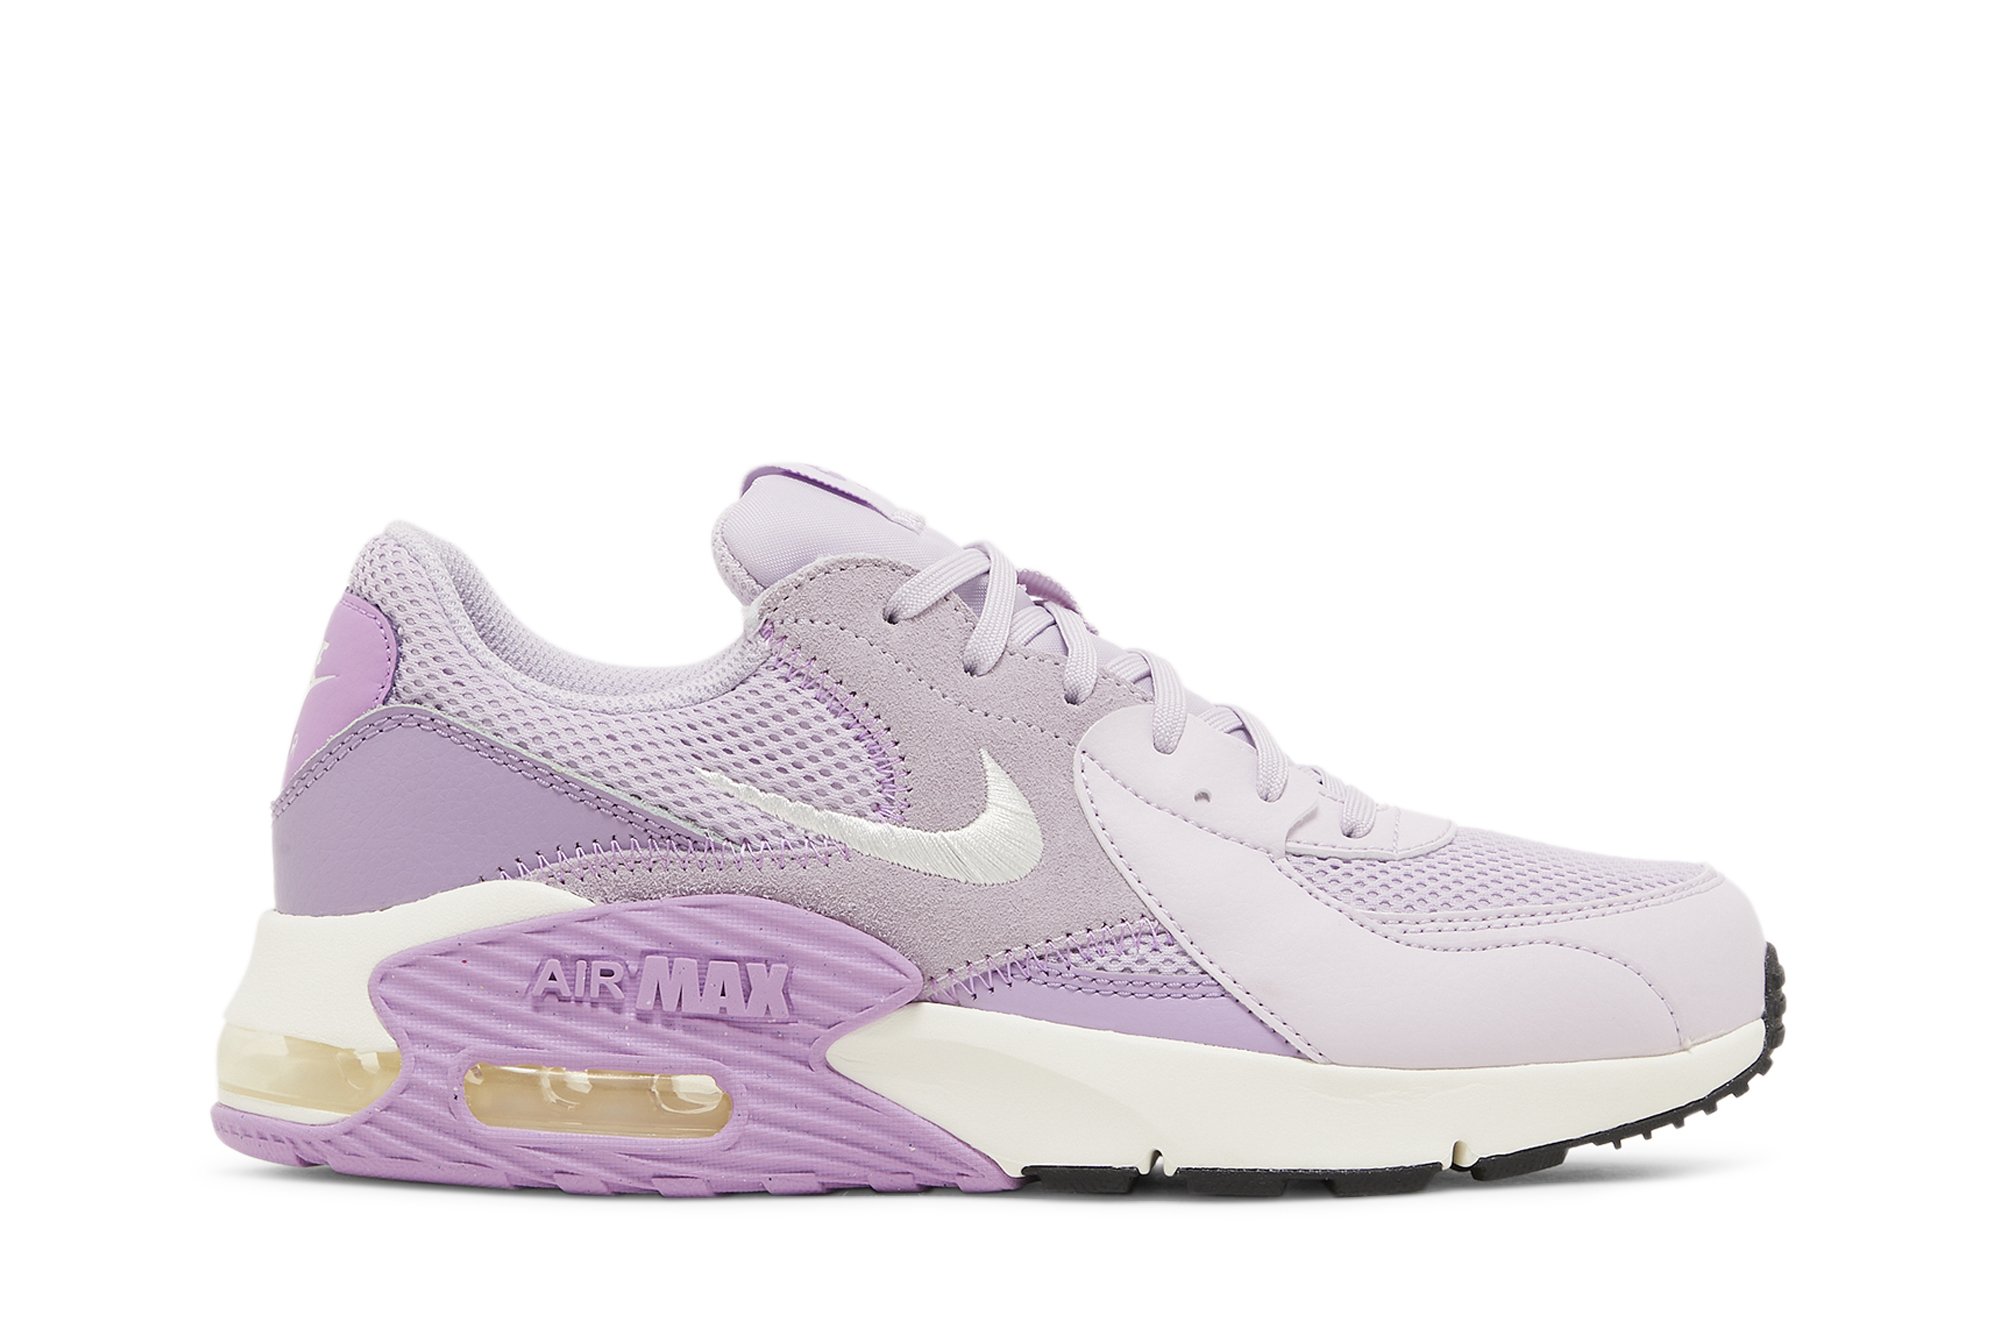 Buy Wmns Air Max Excee 'Violet Star' - CD5432 500 | GOAT